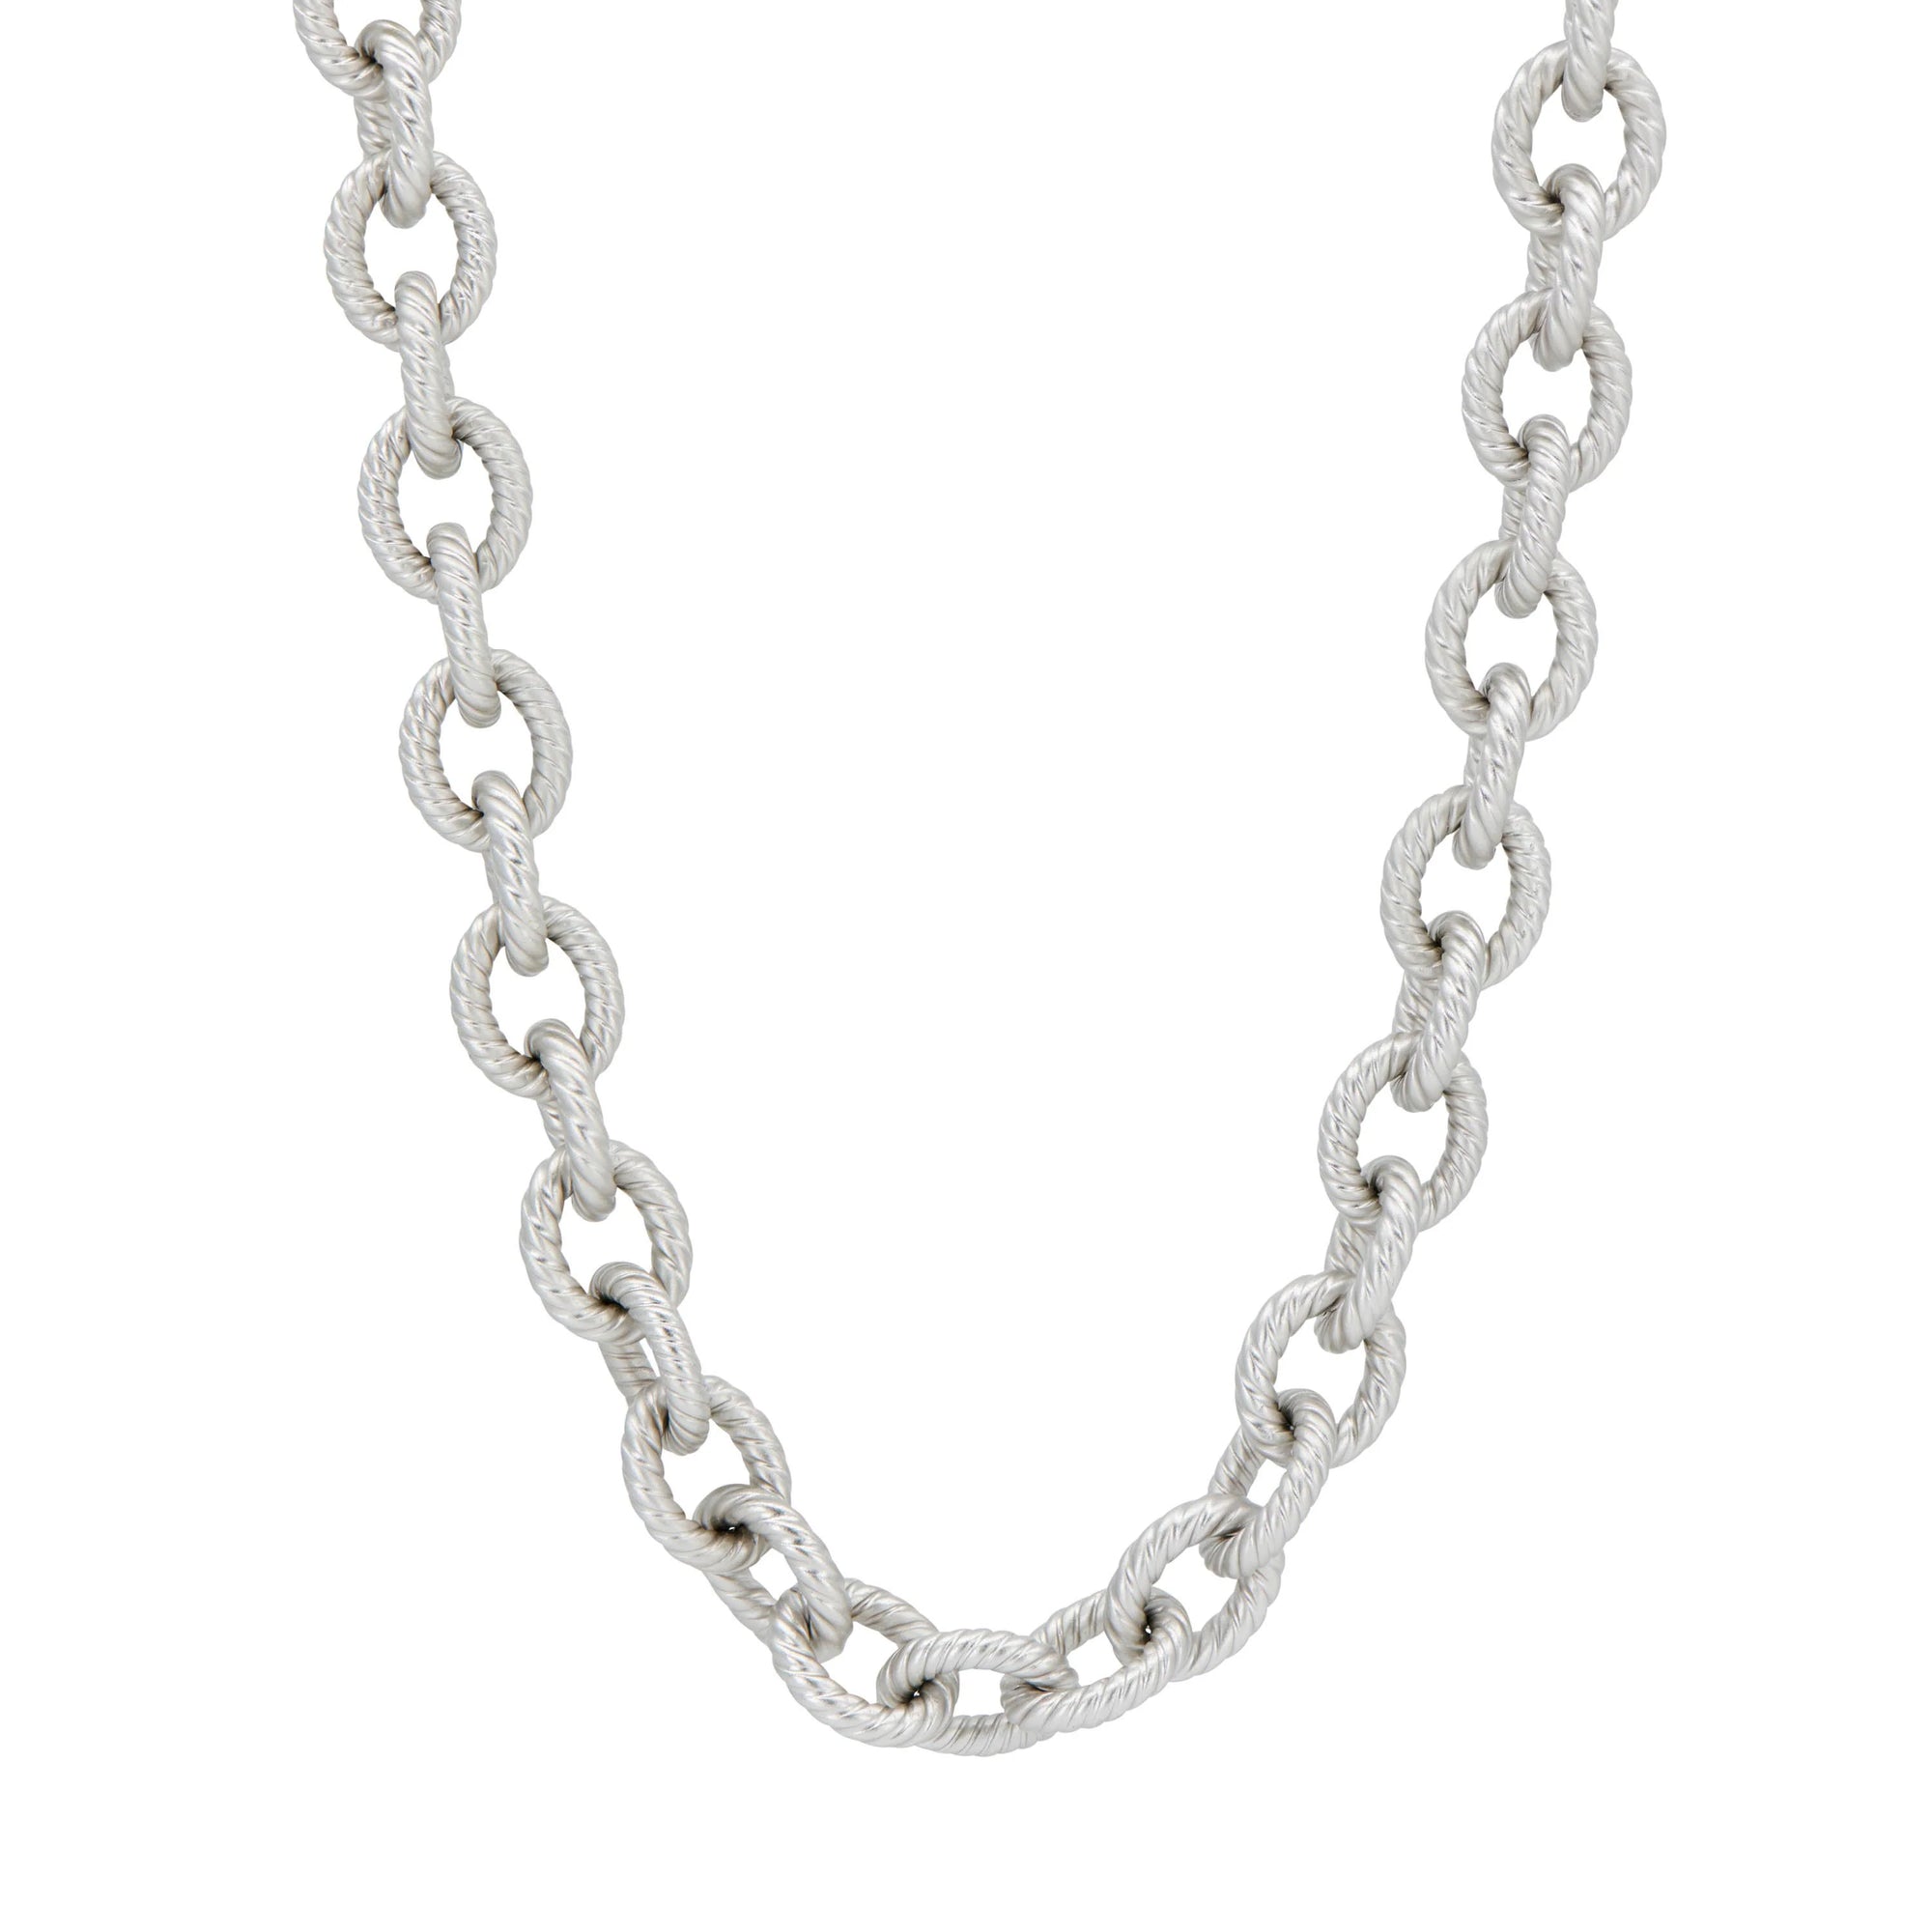 Freida Rothman "Twisted Cable Chain Link Necklace"